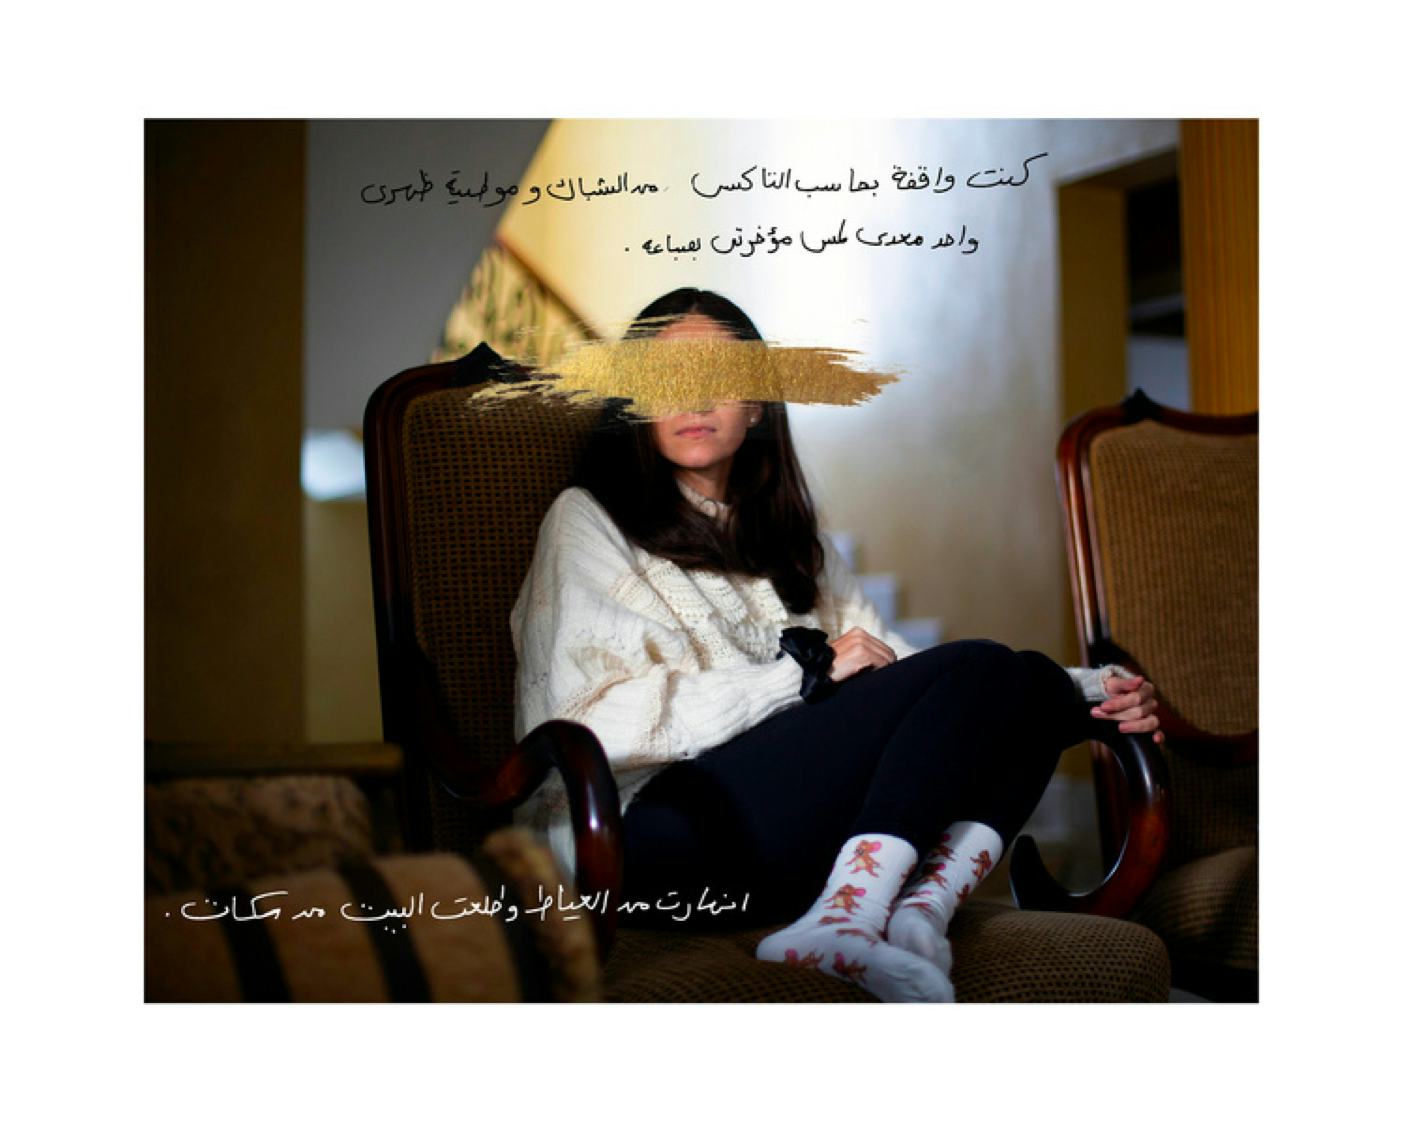 Portrait of a seated women, her eyes covered with a stroke of gold paint. Arabic texts are written around the image.